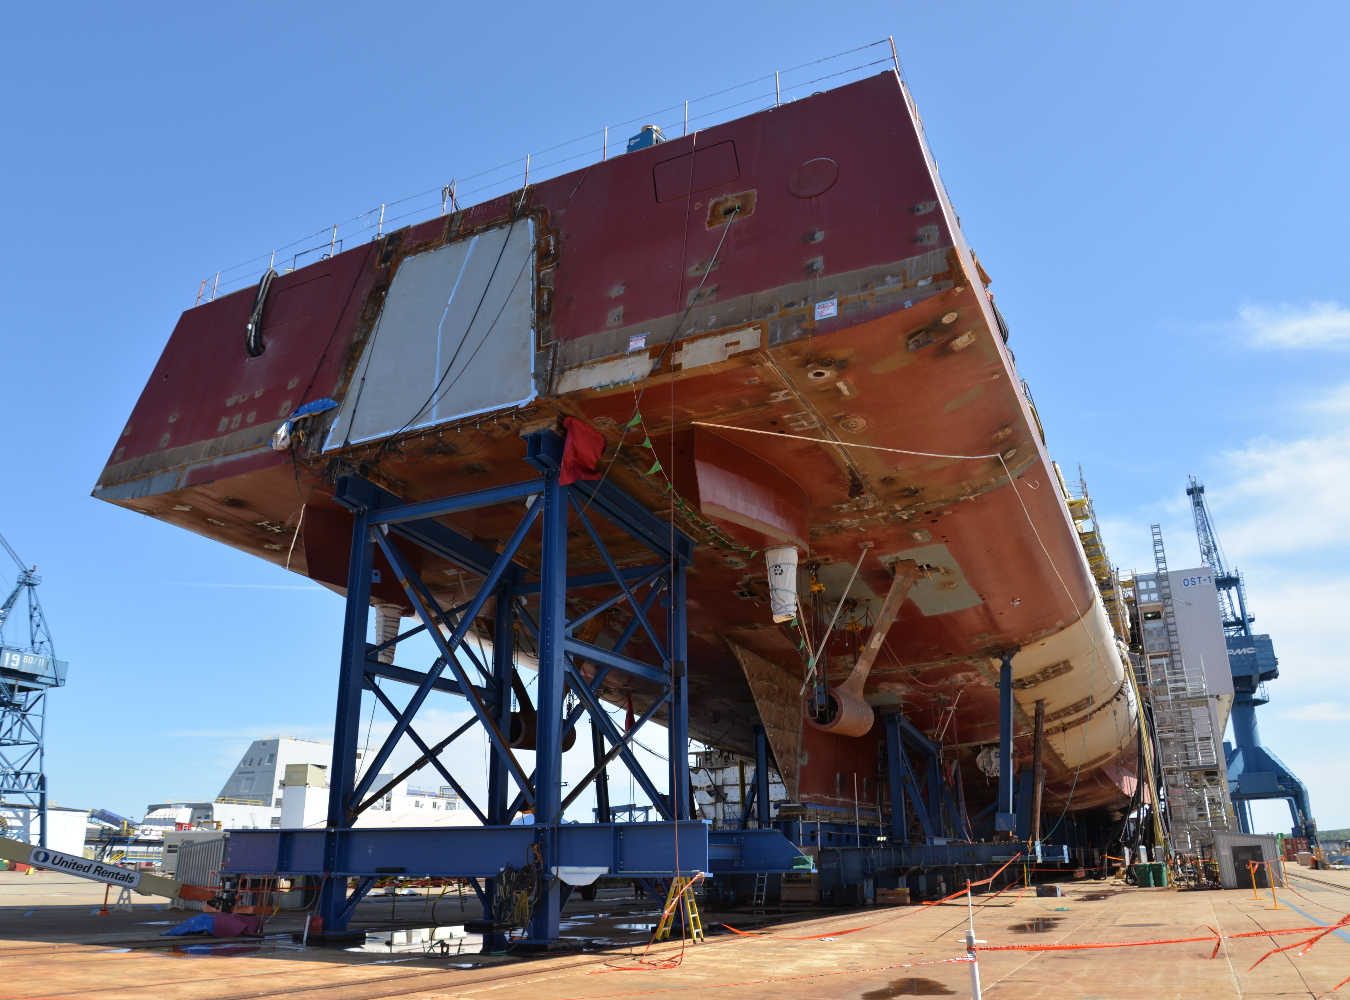 The stern section still awaits installation of the rudders, propellers and propeller shafts. 